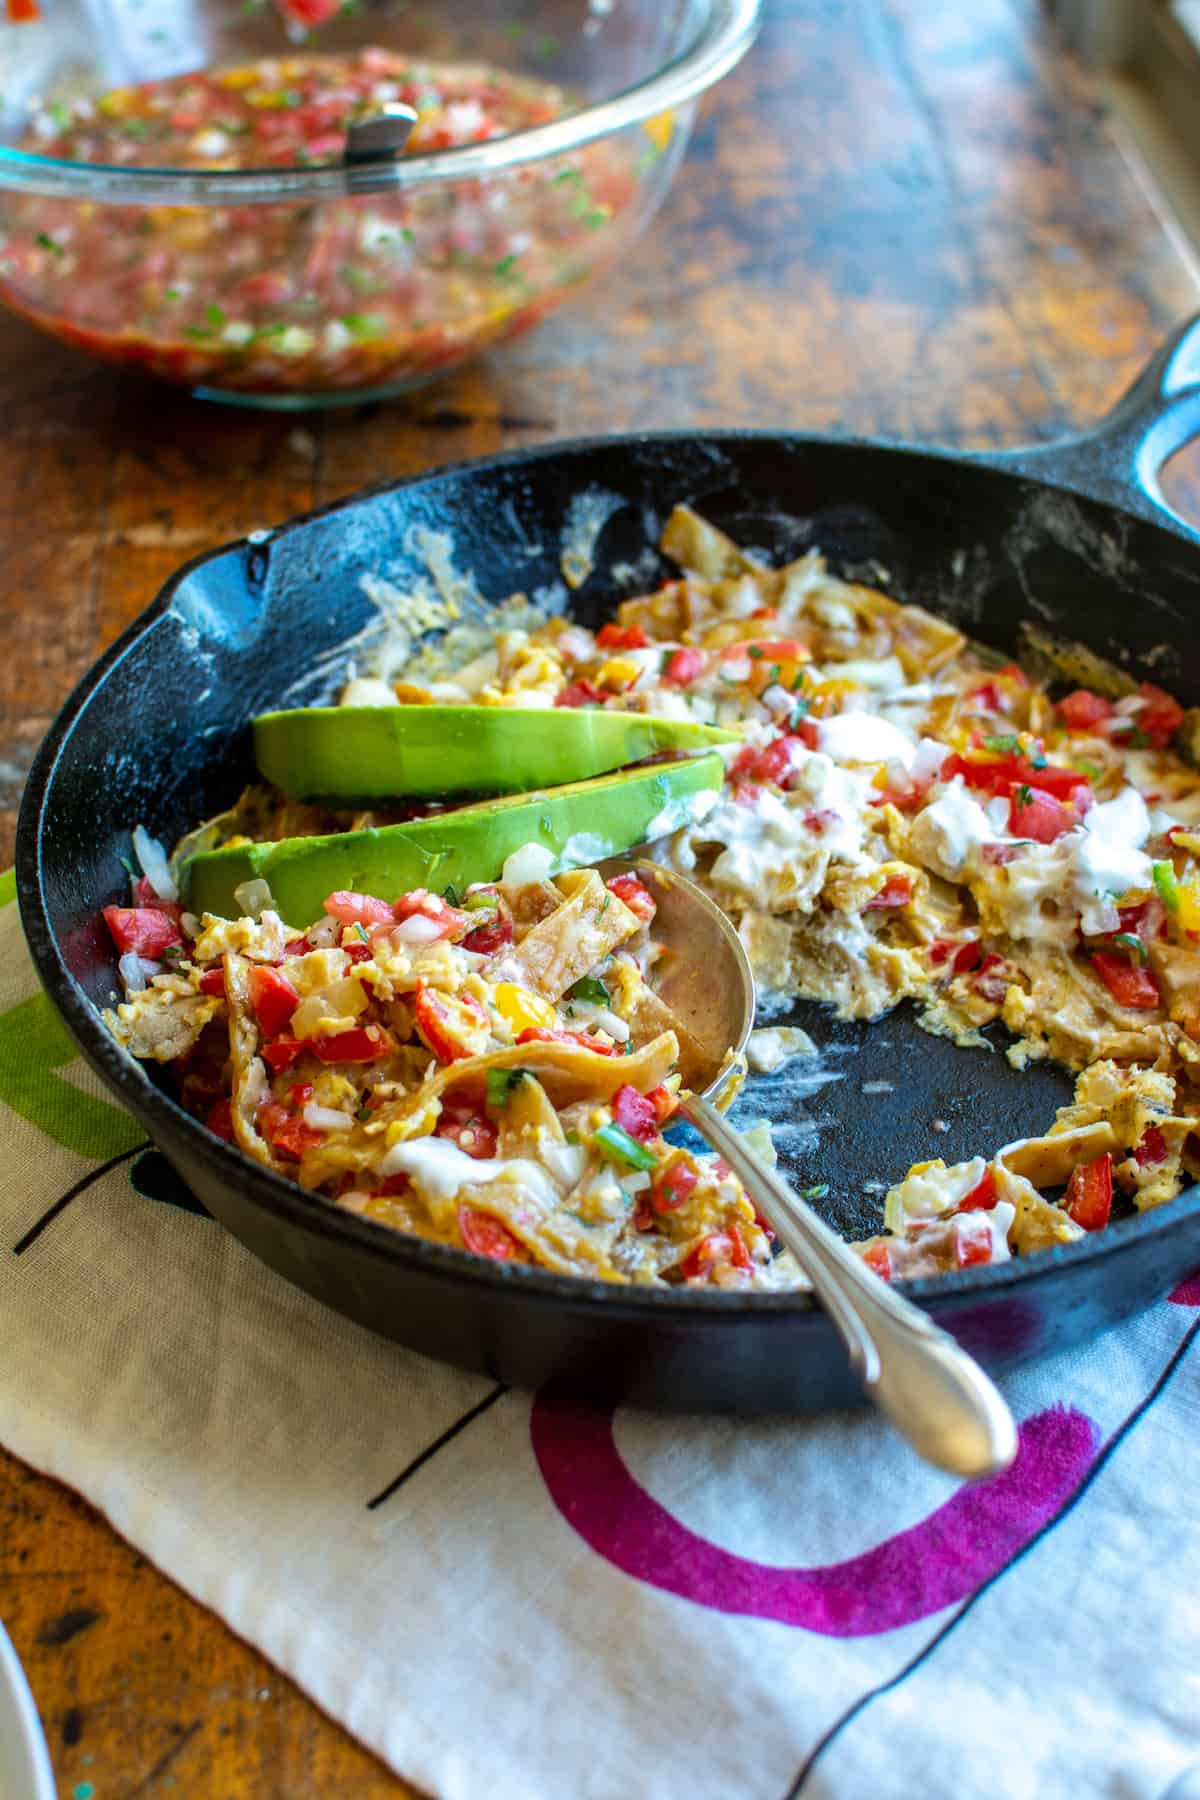 A black cast iron skillet filled with migas on a white kitchen towel with a glass bowl behind it.